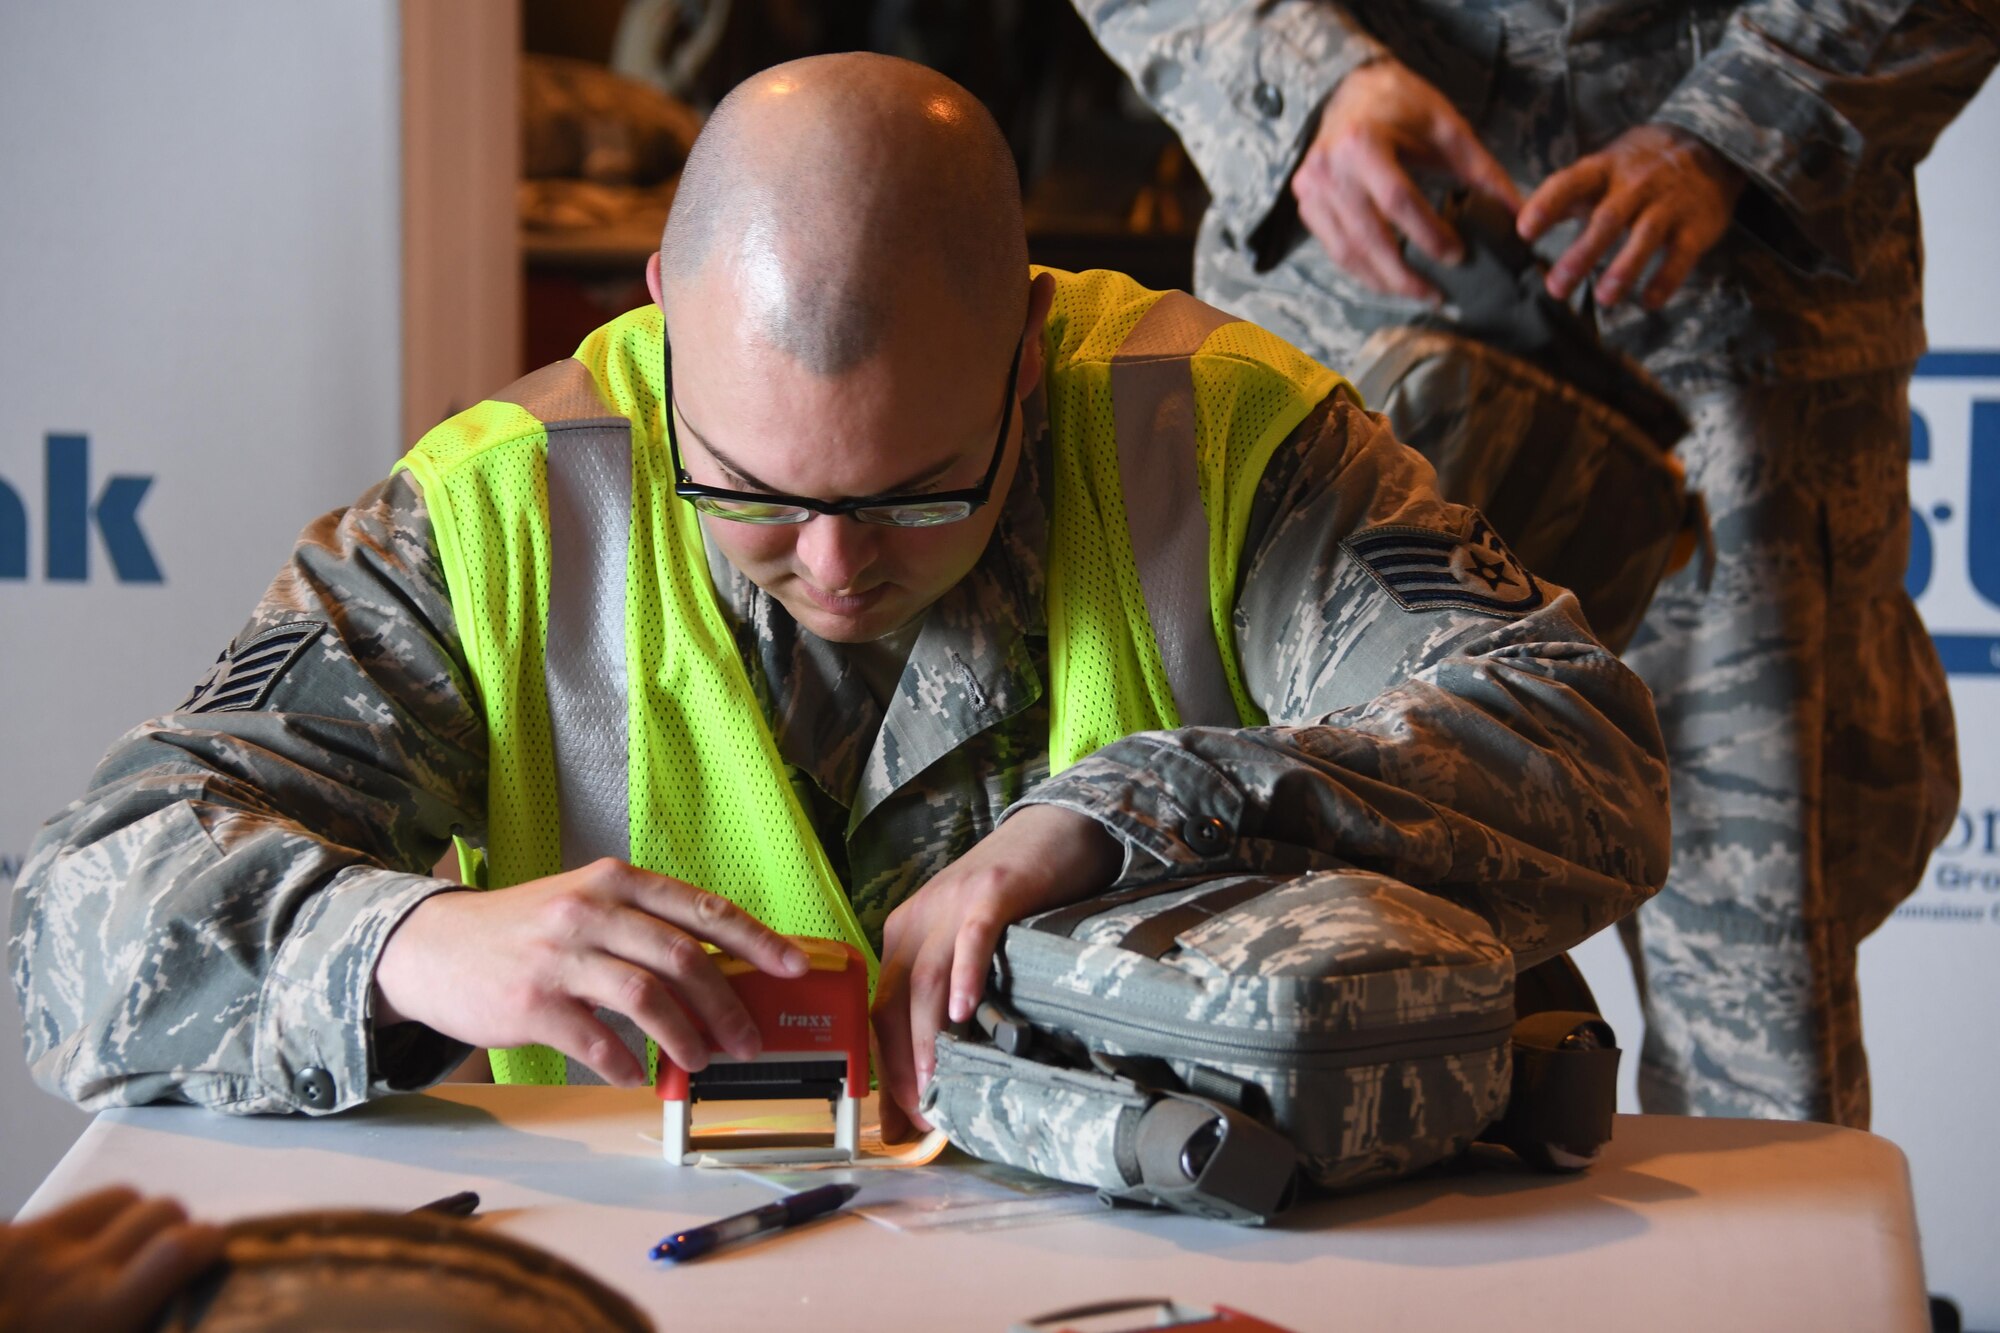 U.S. Air Force Staff Sgt. Michael Tillema, a noncommissioned officer in charge with the 379th Expeditionary Medical Support Squadron, inspects a joint first aid kit at Al Udeid Air Base, Qatar, Dec. 20, 2016. The JFAK’s are inspected to ensure that they are put together properly before being issued to Airmen going into combat zones, whose lives may depend on using the JFAK quickly and easily. (U.S. Air Force photo by Senior Airman Miles Wilson)